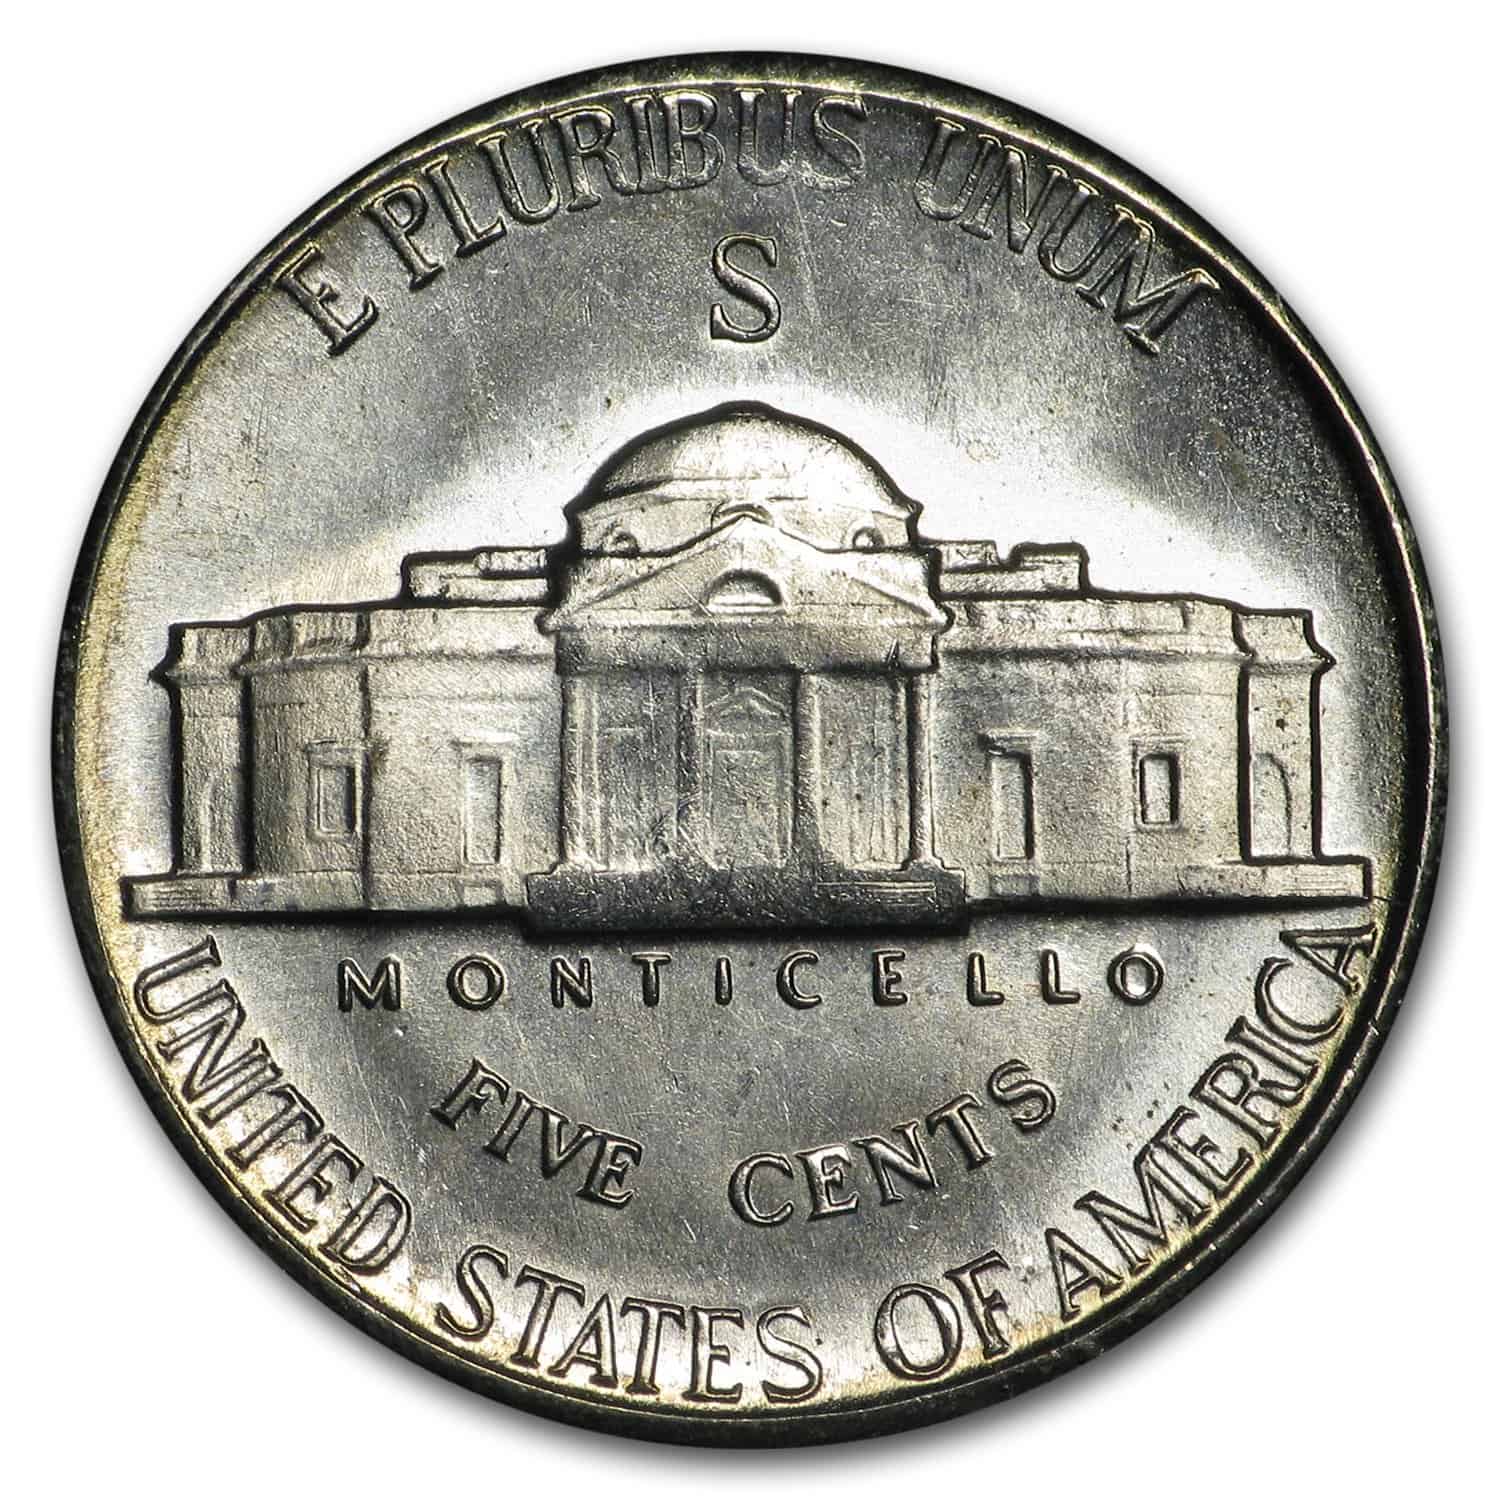 The Reverse Of the 1944 Nickel